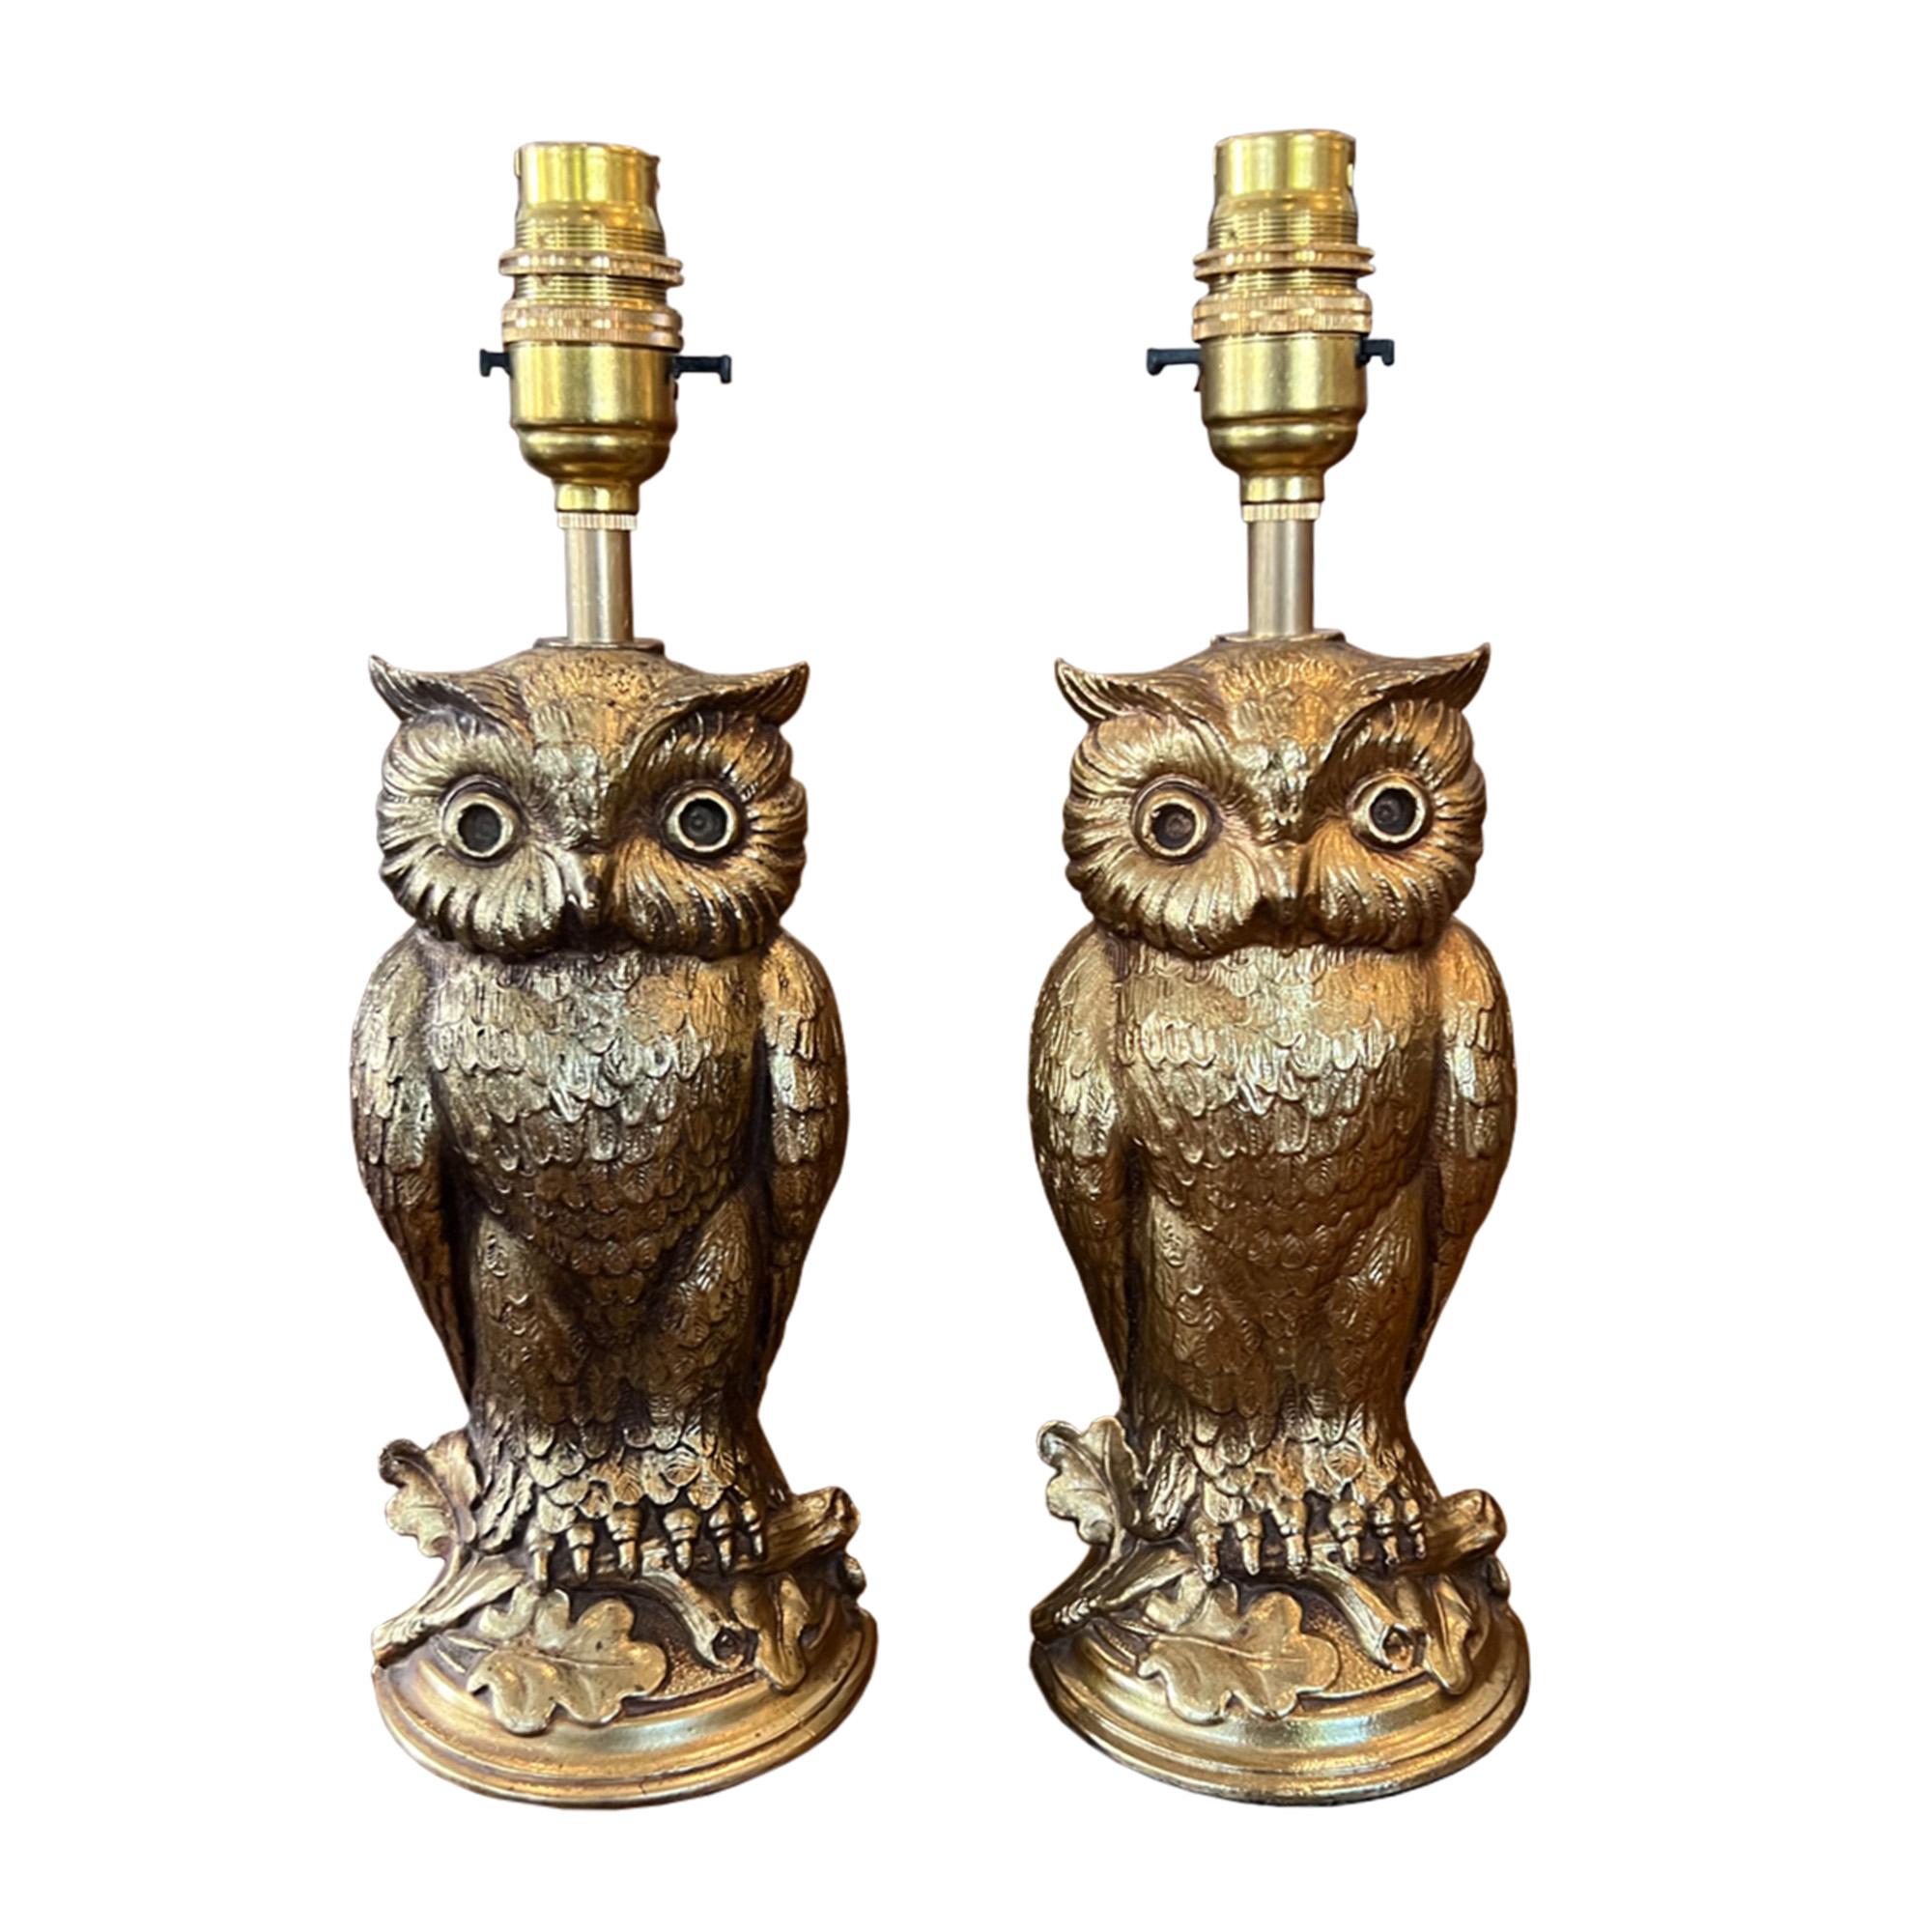 A delightful pair of table lamps - two gorgeous owls sitting on an oak stump. 

Lovely detail from the eyes to the feathers and oak leaves. Made in France in the 1960s and very decorative.

We've had them rewired using rope twisted silk flex.